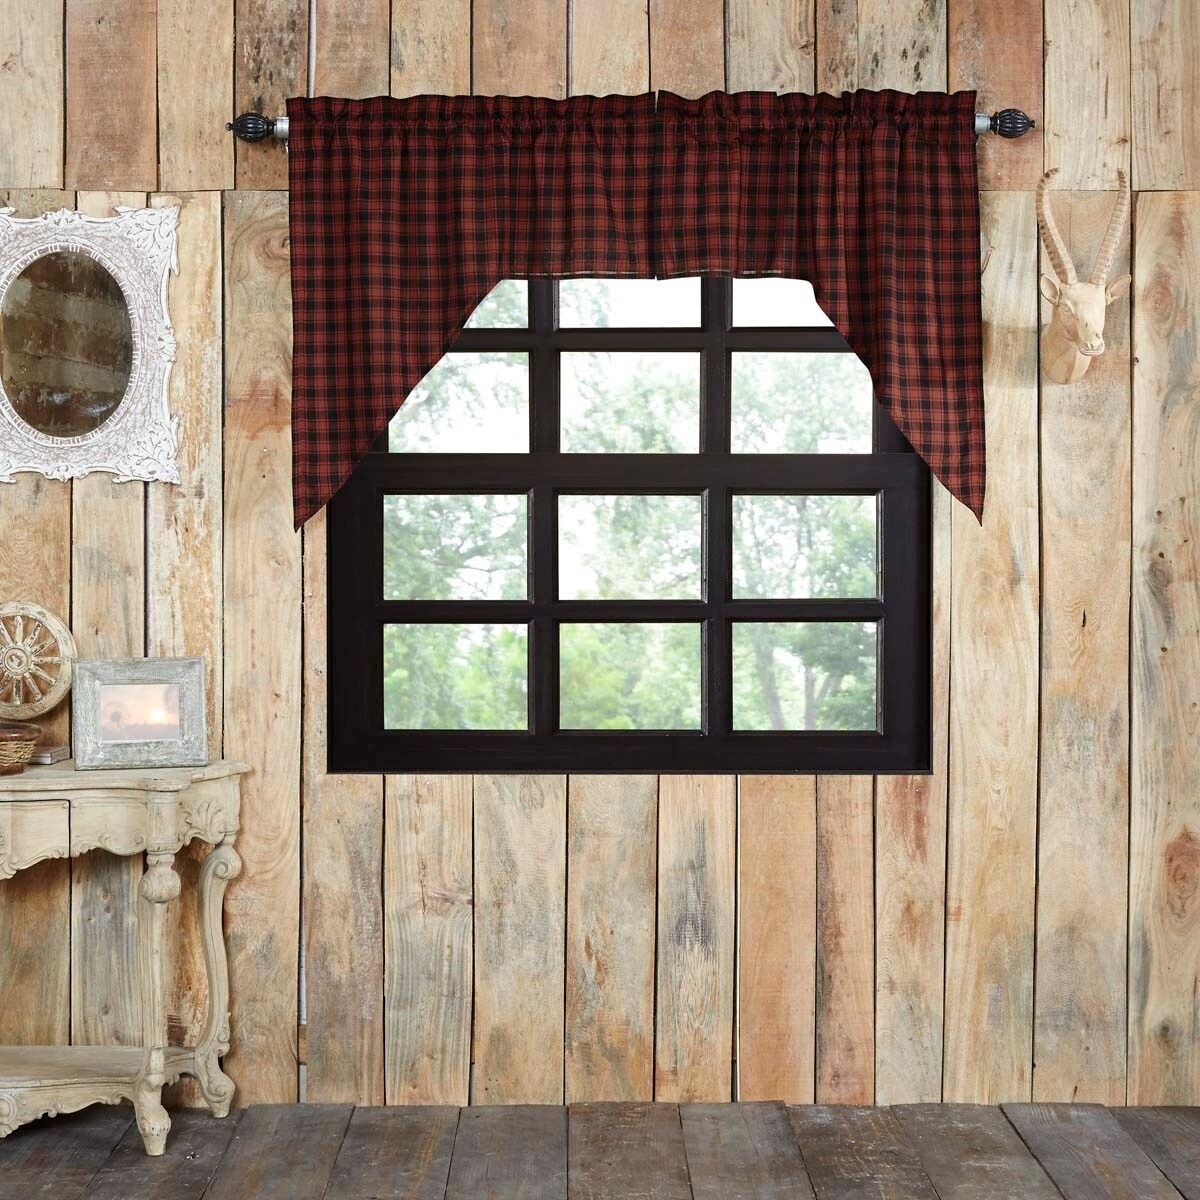 Shop Red Rustic Kitchen Curtains Vhc Cumberland Swag Pair Rod Pocket Cotton Buffalo Check Swag 36x36x16 Swag 36x36x16 Overstock 17926258